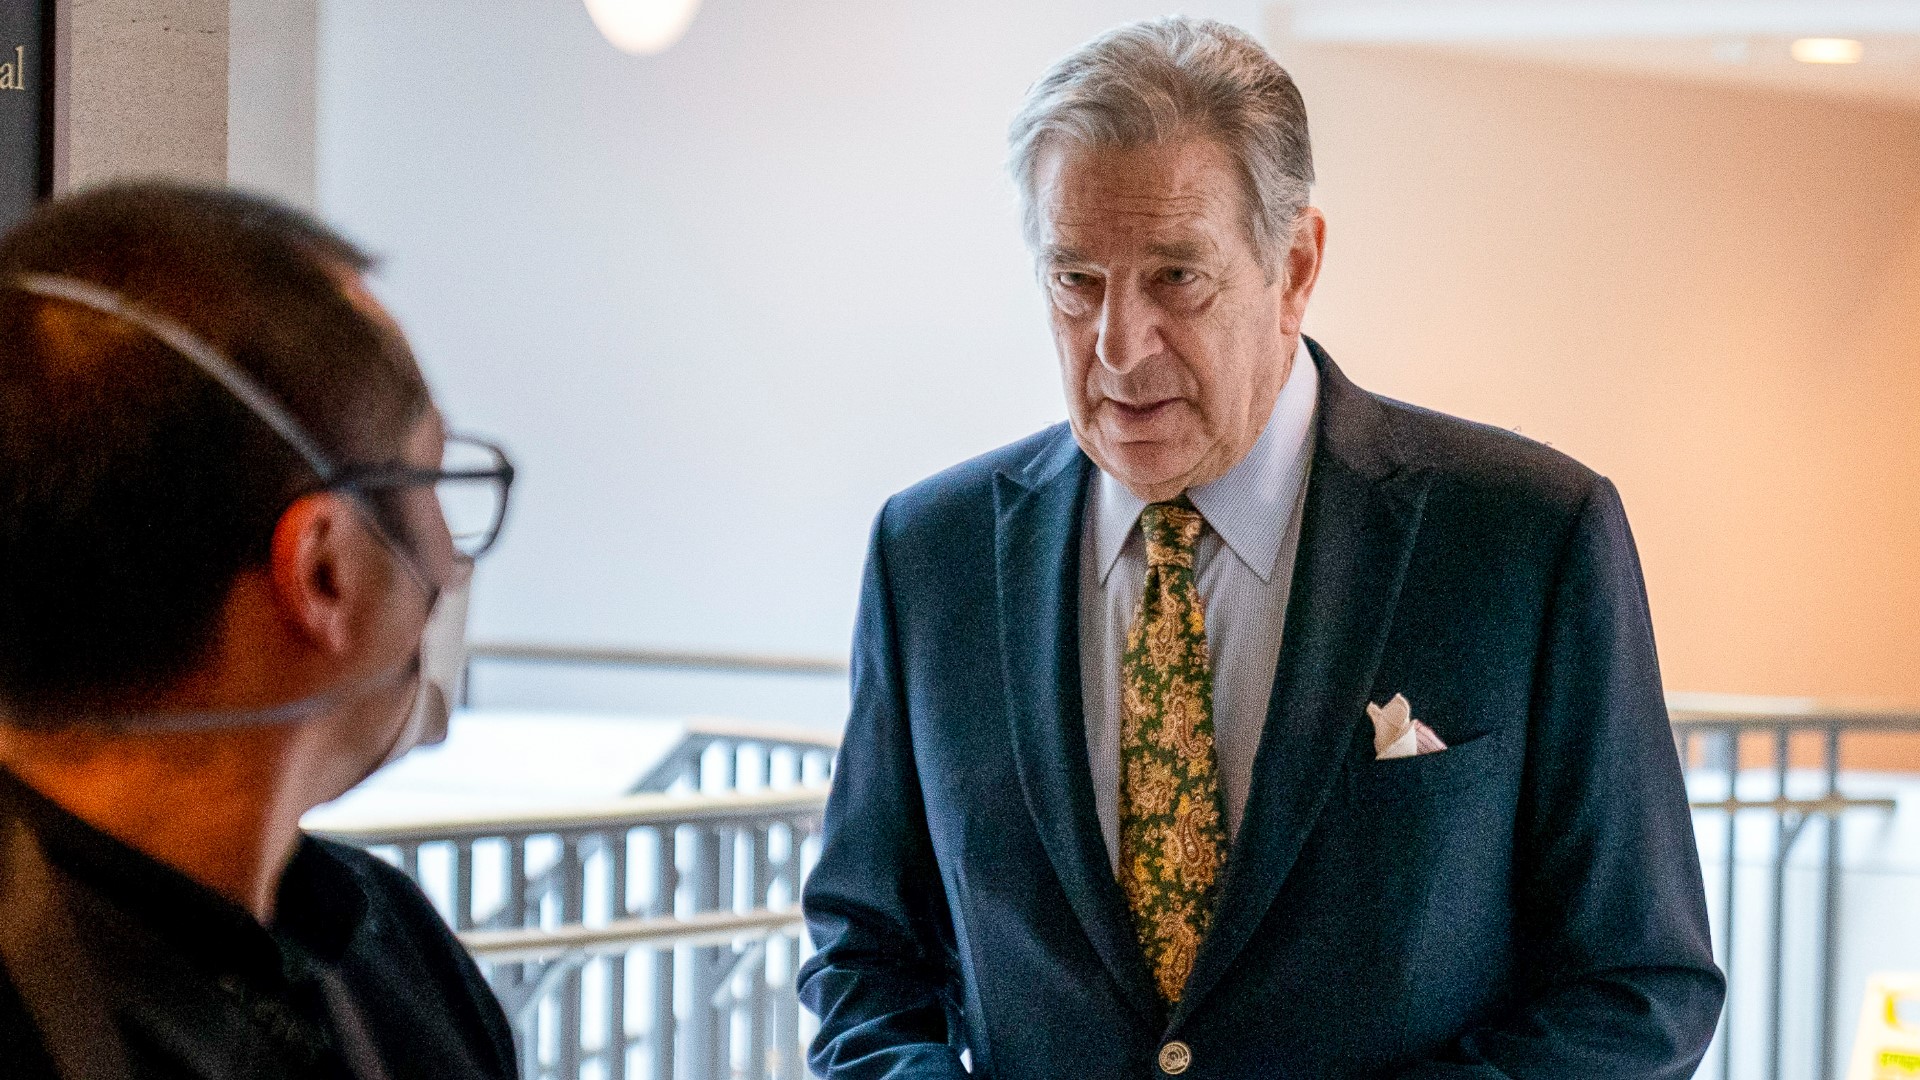 Paul Pelosi, 82, was severely beaten and suffered blunt force injuries in the attack, two people with knowledge of the investigation told the Associated Press.